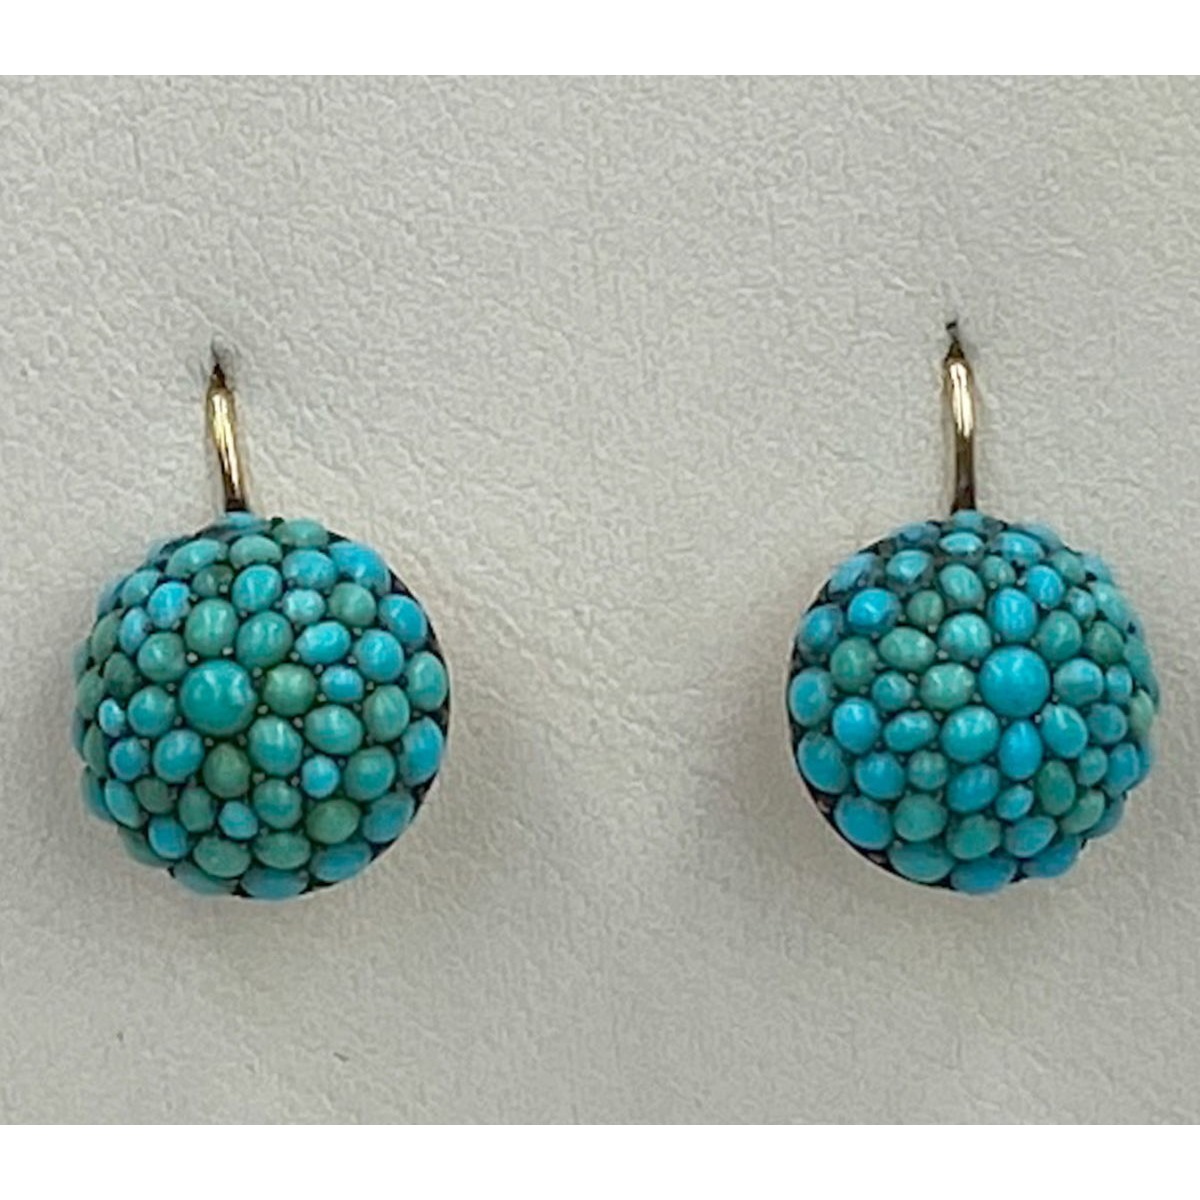 Outstanding Brilliant Persian Turquoise Dome Drop Antique English Gold Earrings